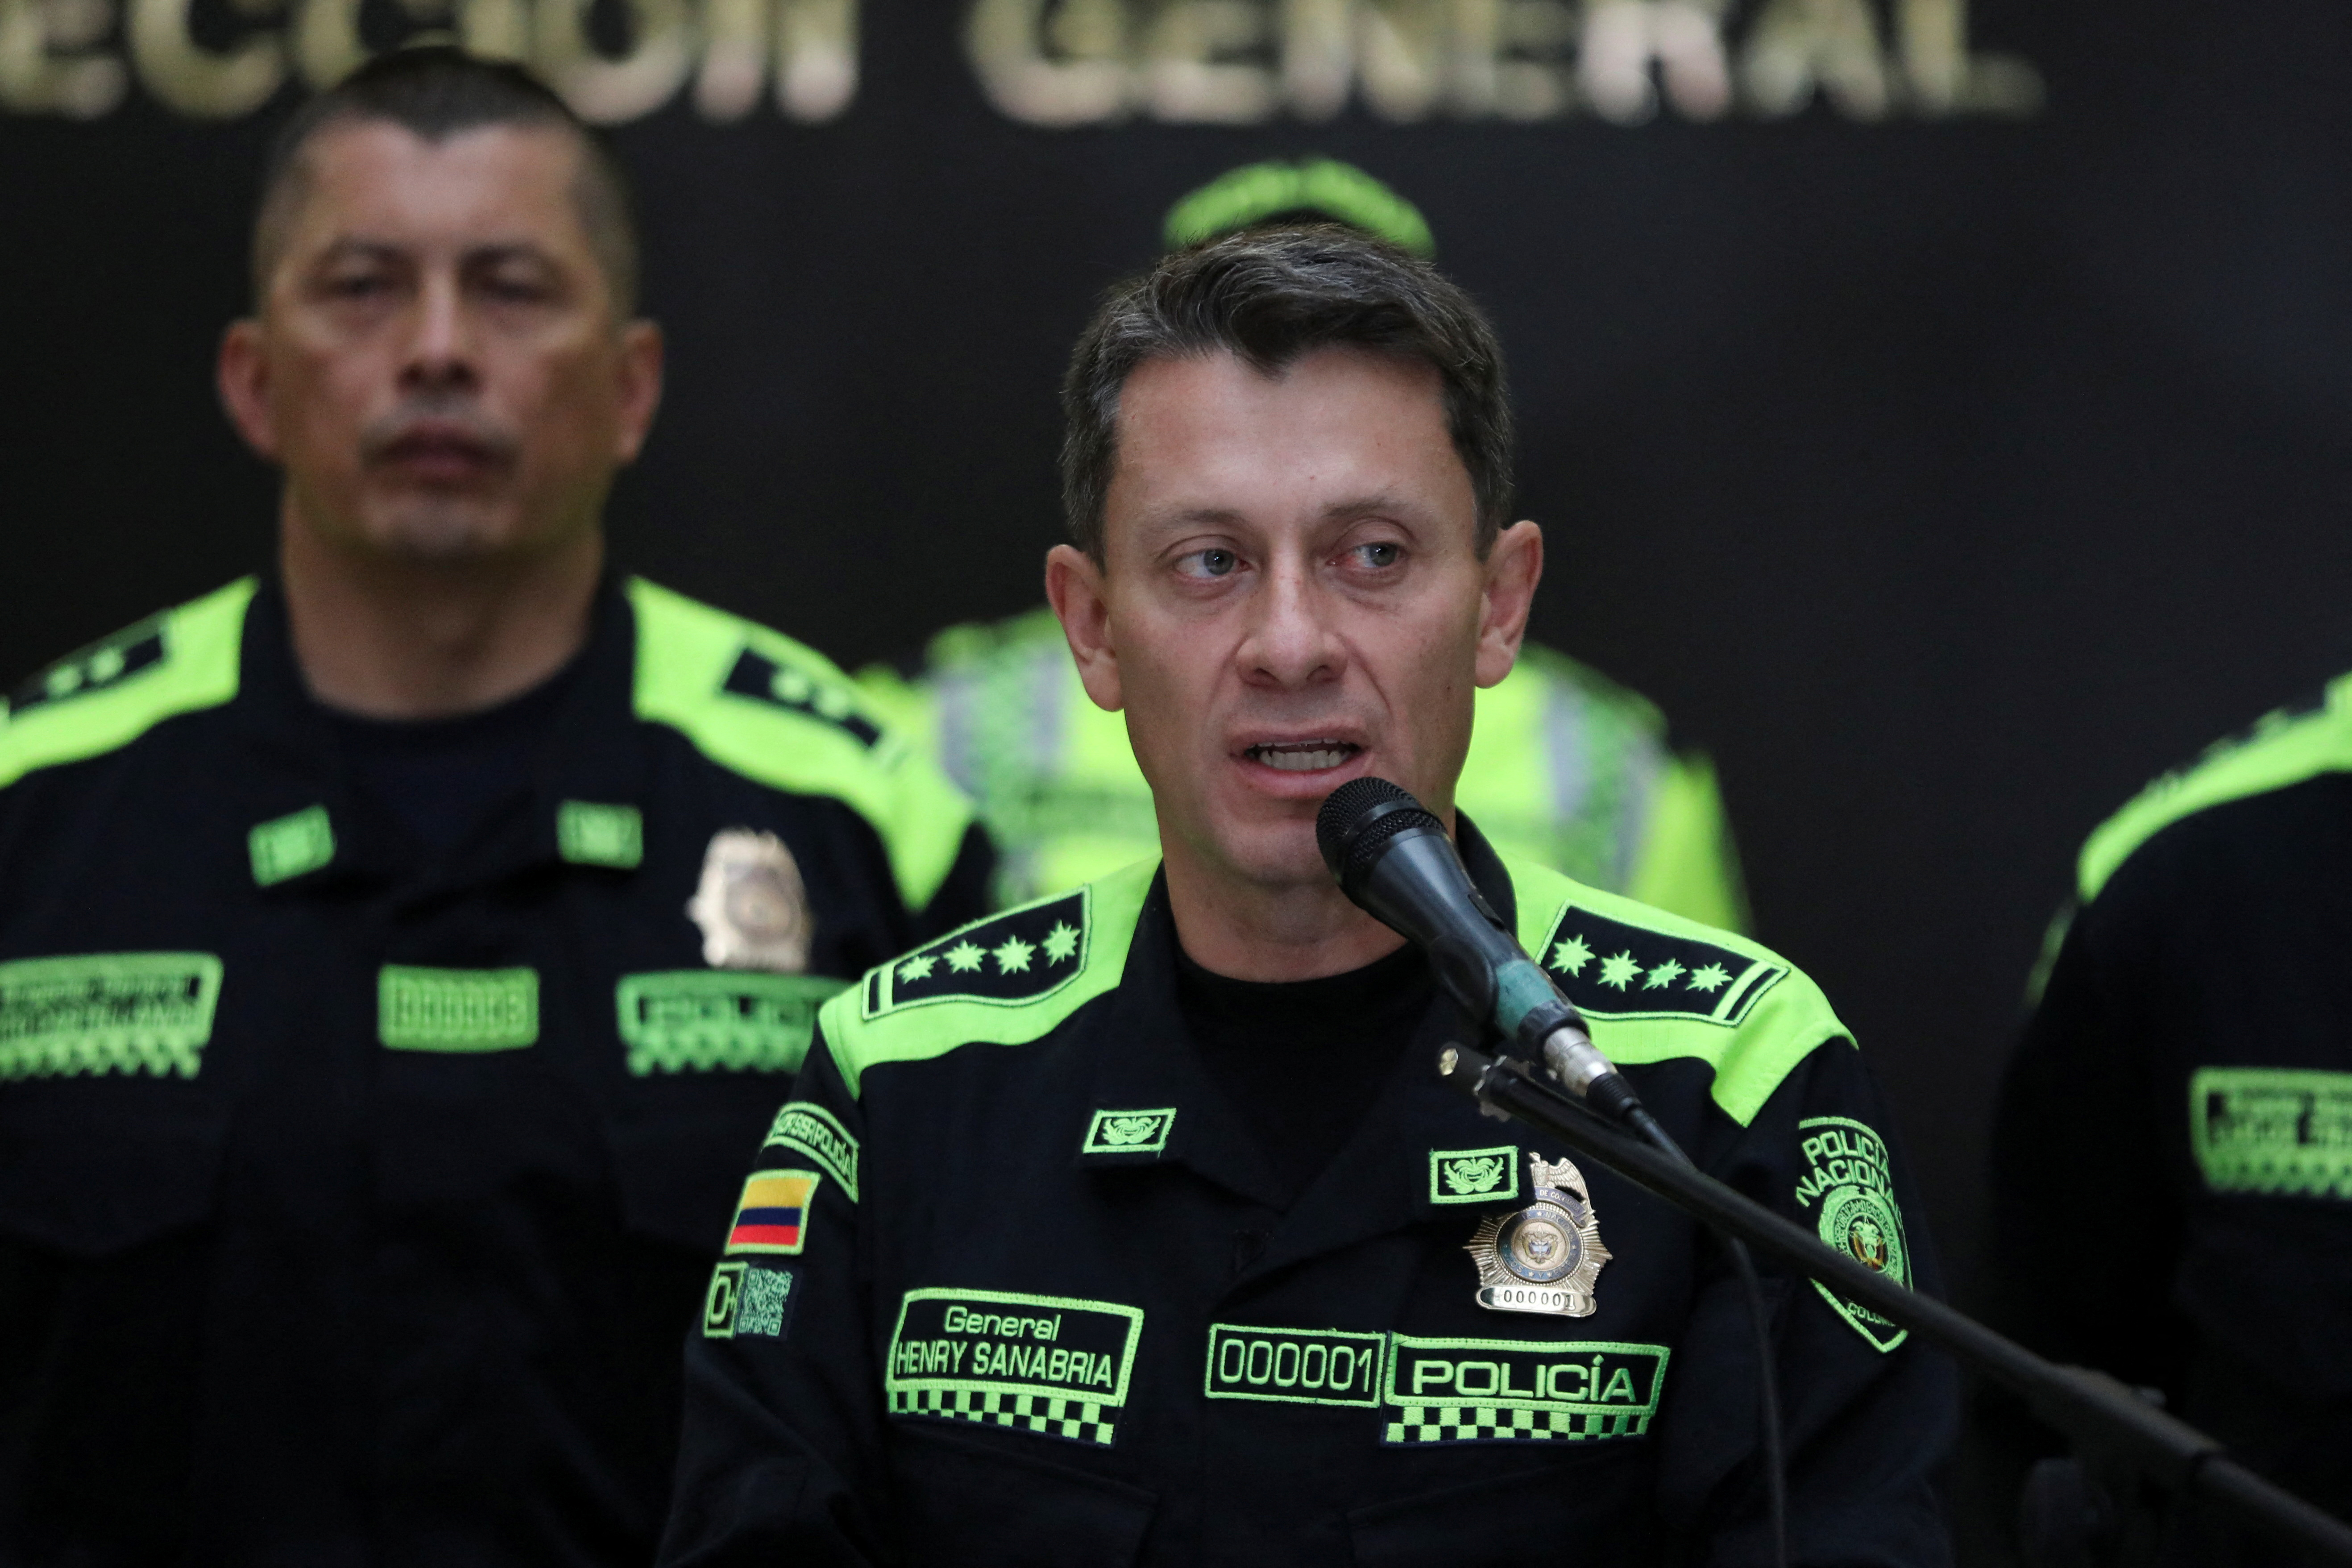 Seizure of weapons, explosives and ammunition that authorities say belonged to dissidents of the Revolutionary Armed Forces of Colombia (FARC), in Bogota